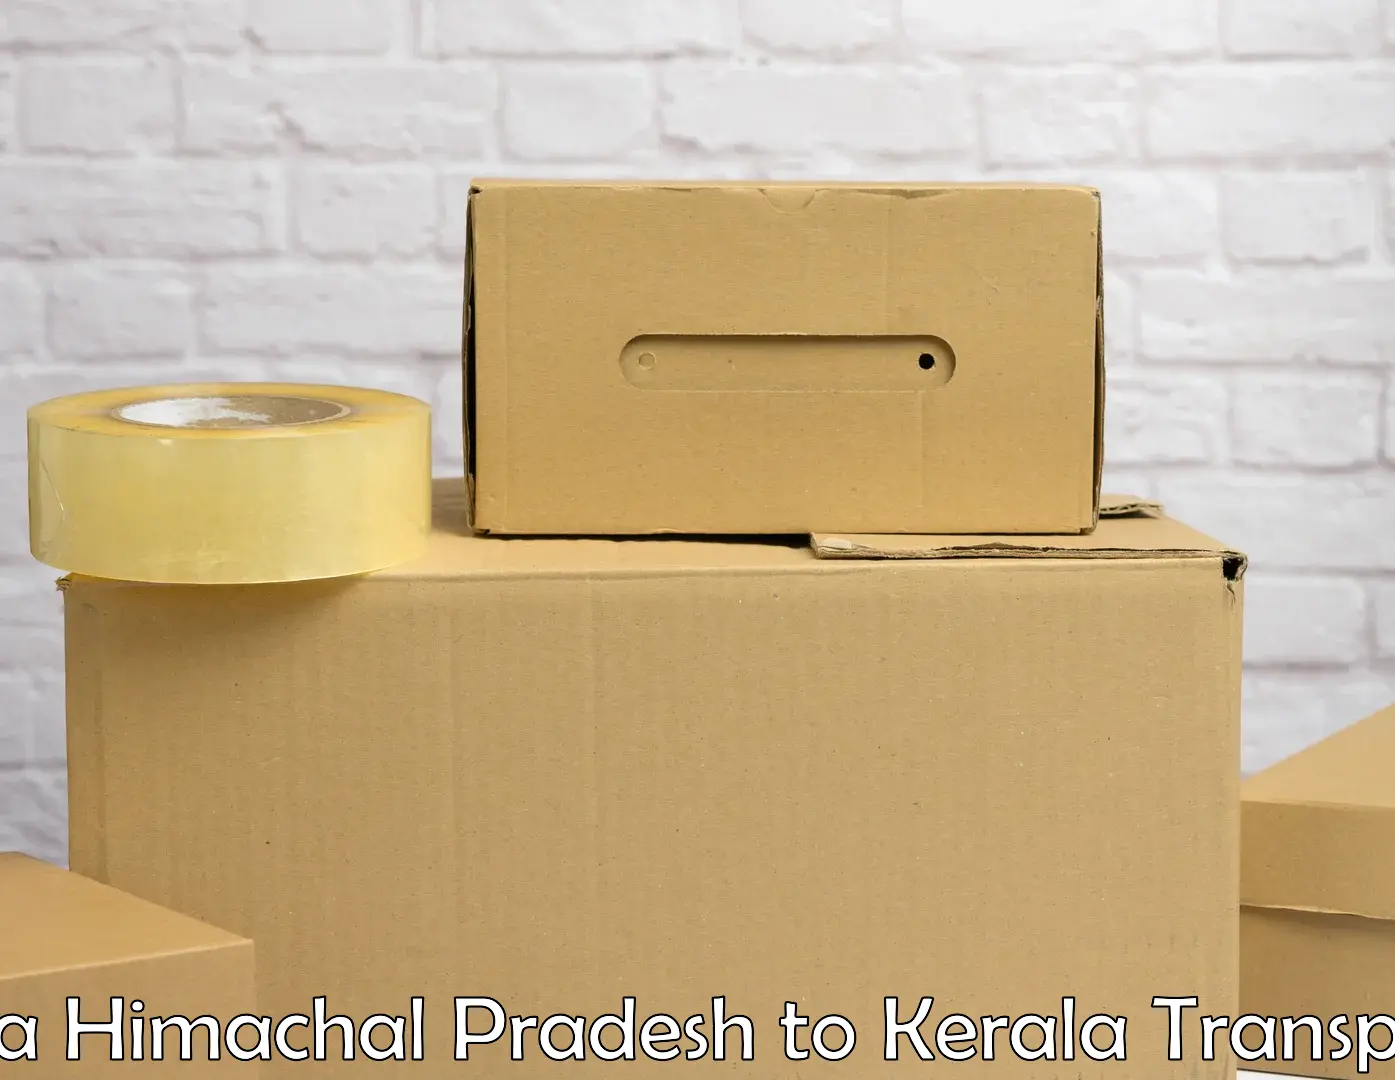 Package delivery services in Una Himachal Pradesh to Nedumkandam